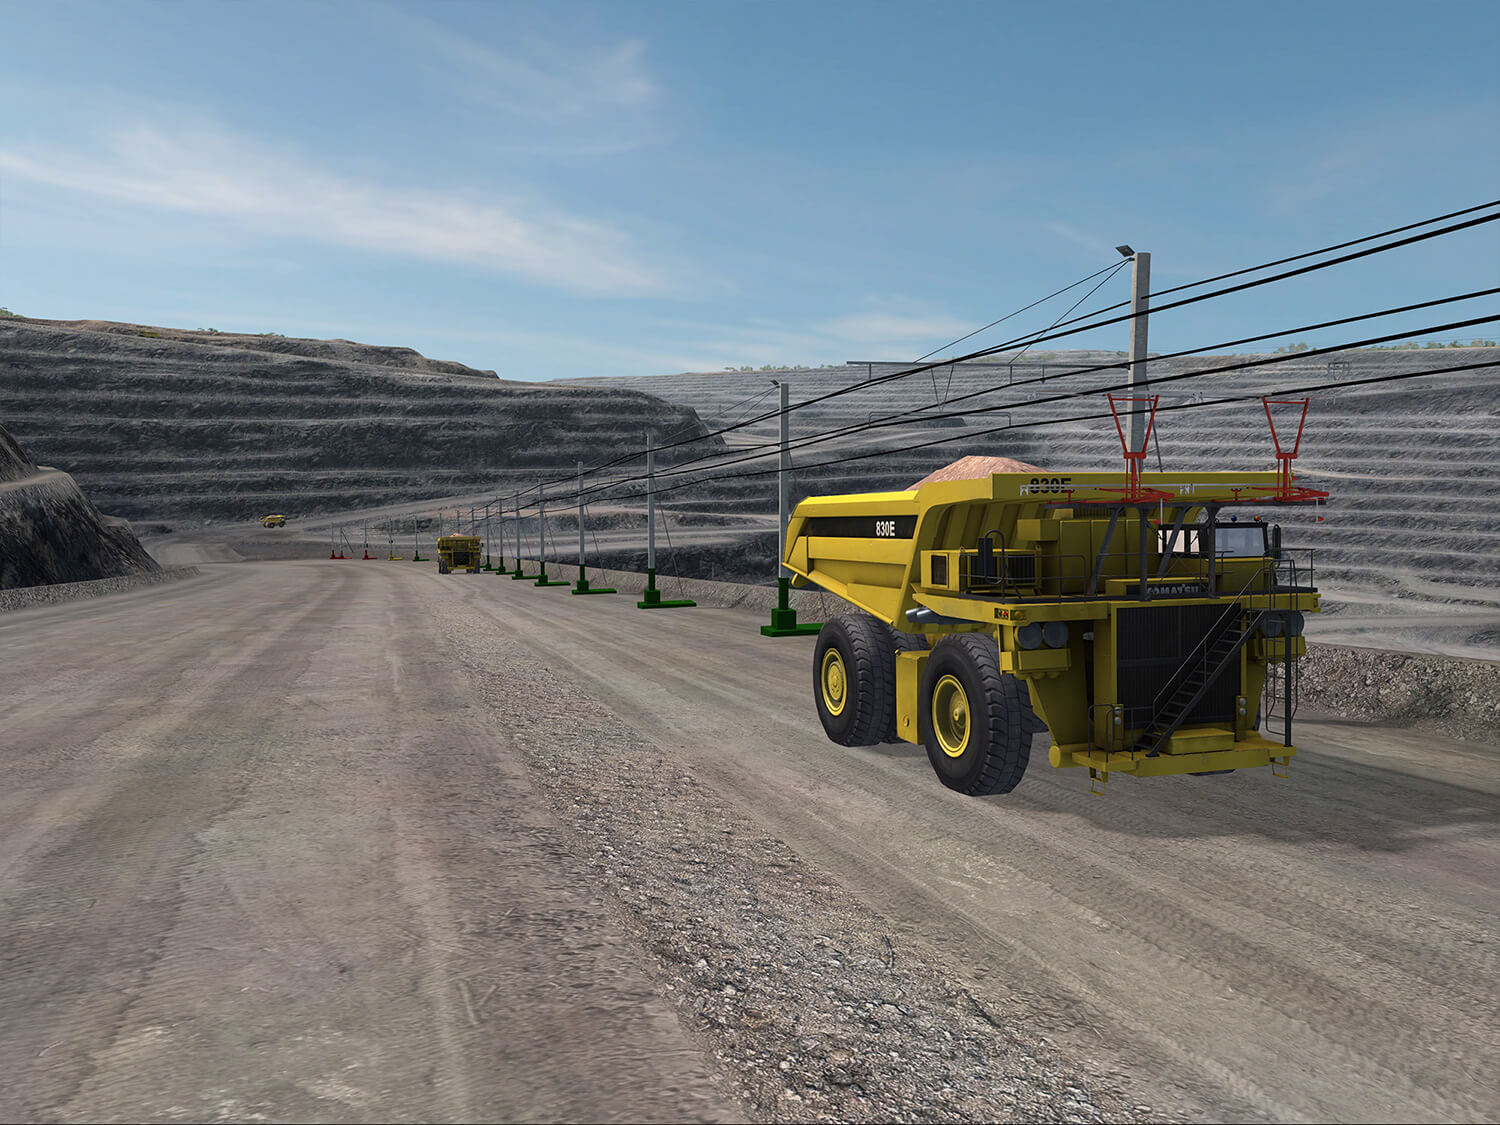 Komatsu 830E-5T Haul Truck (Trolley Assist, with Multifunctional Operator Display) - Connected Snapshot